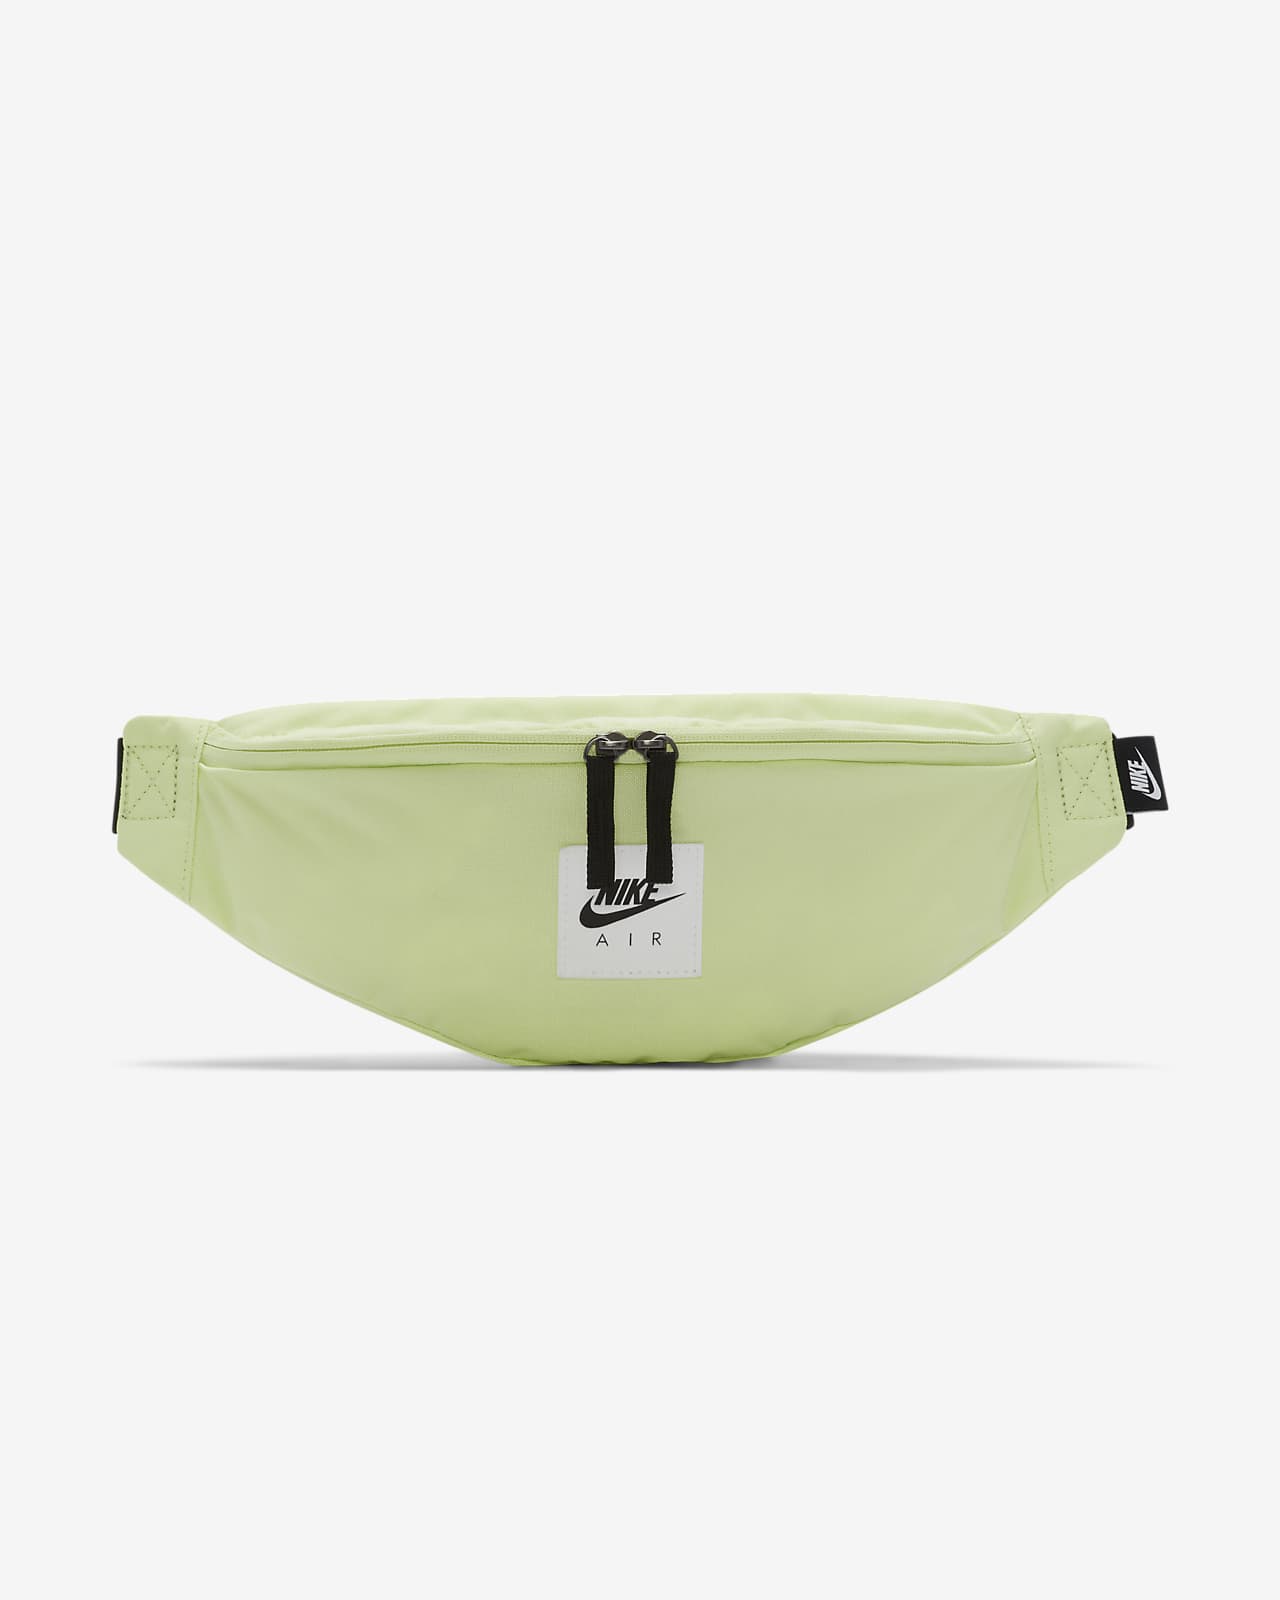 nike lime green fanny pack